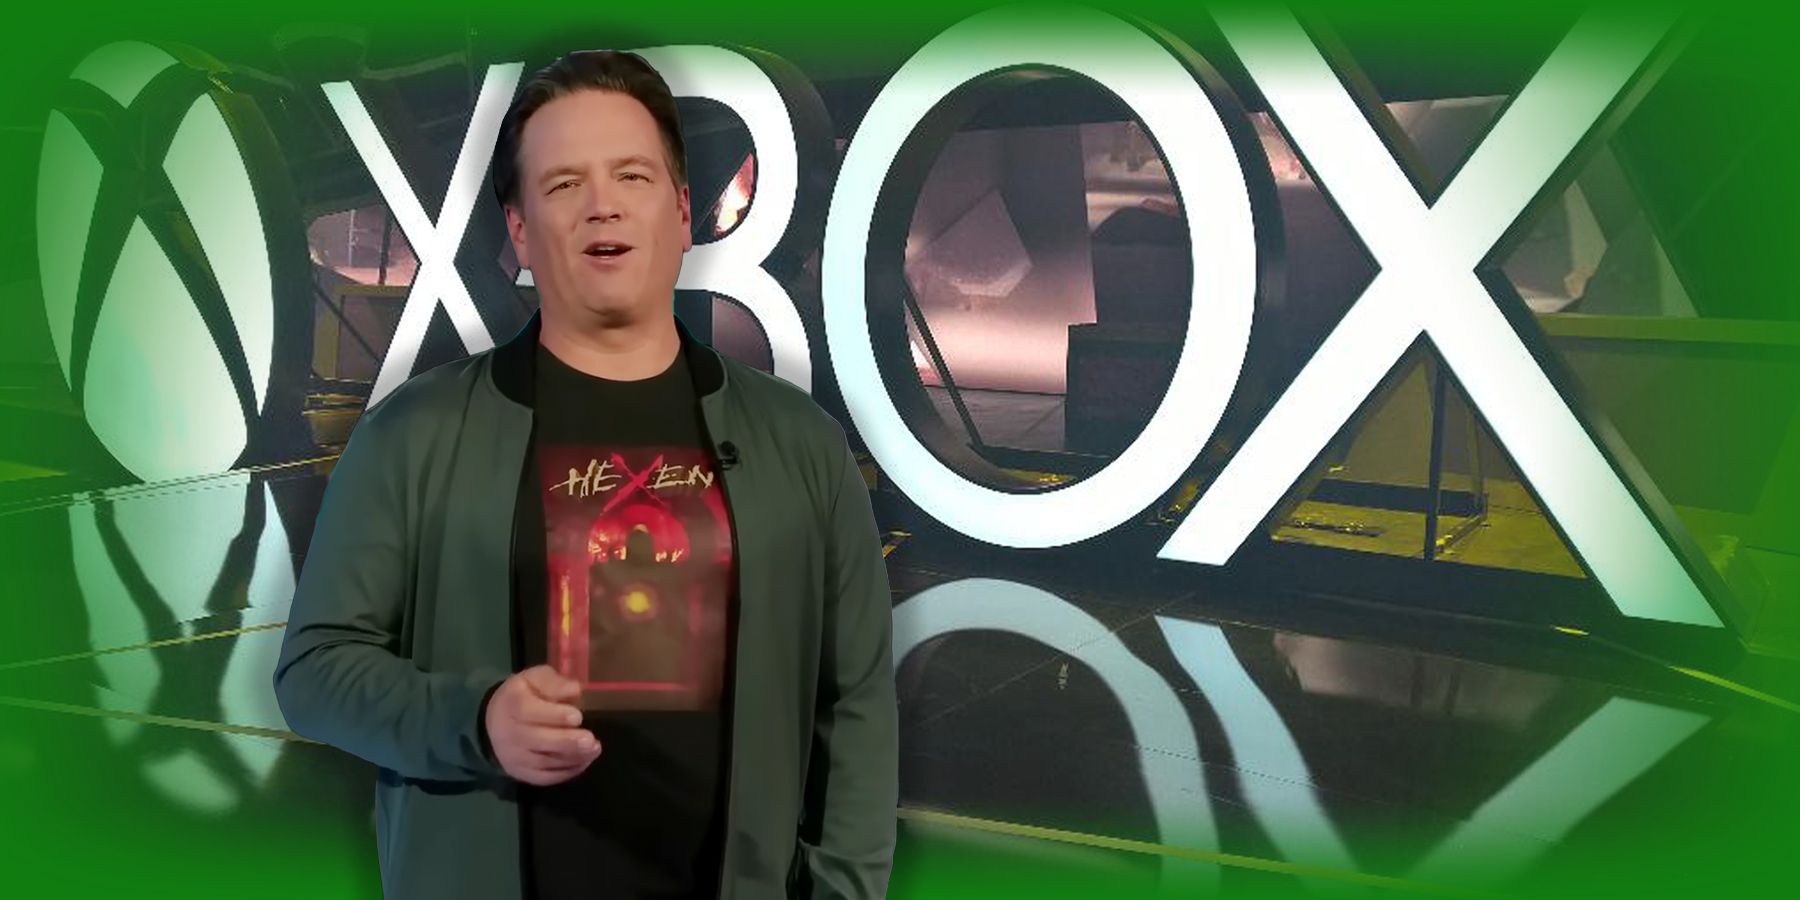 phil spencer in front of xbox logo